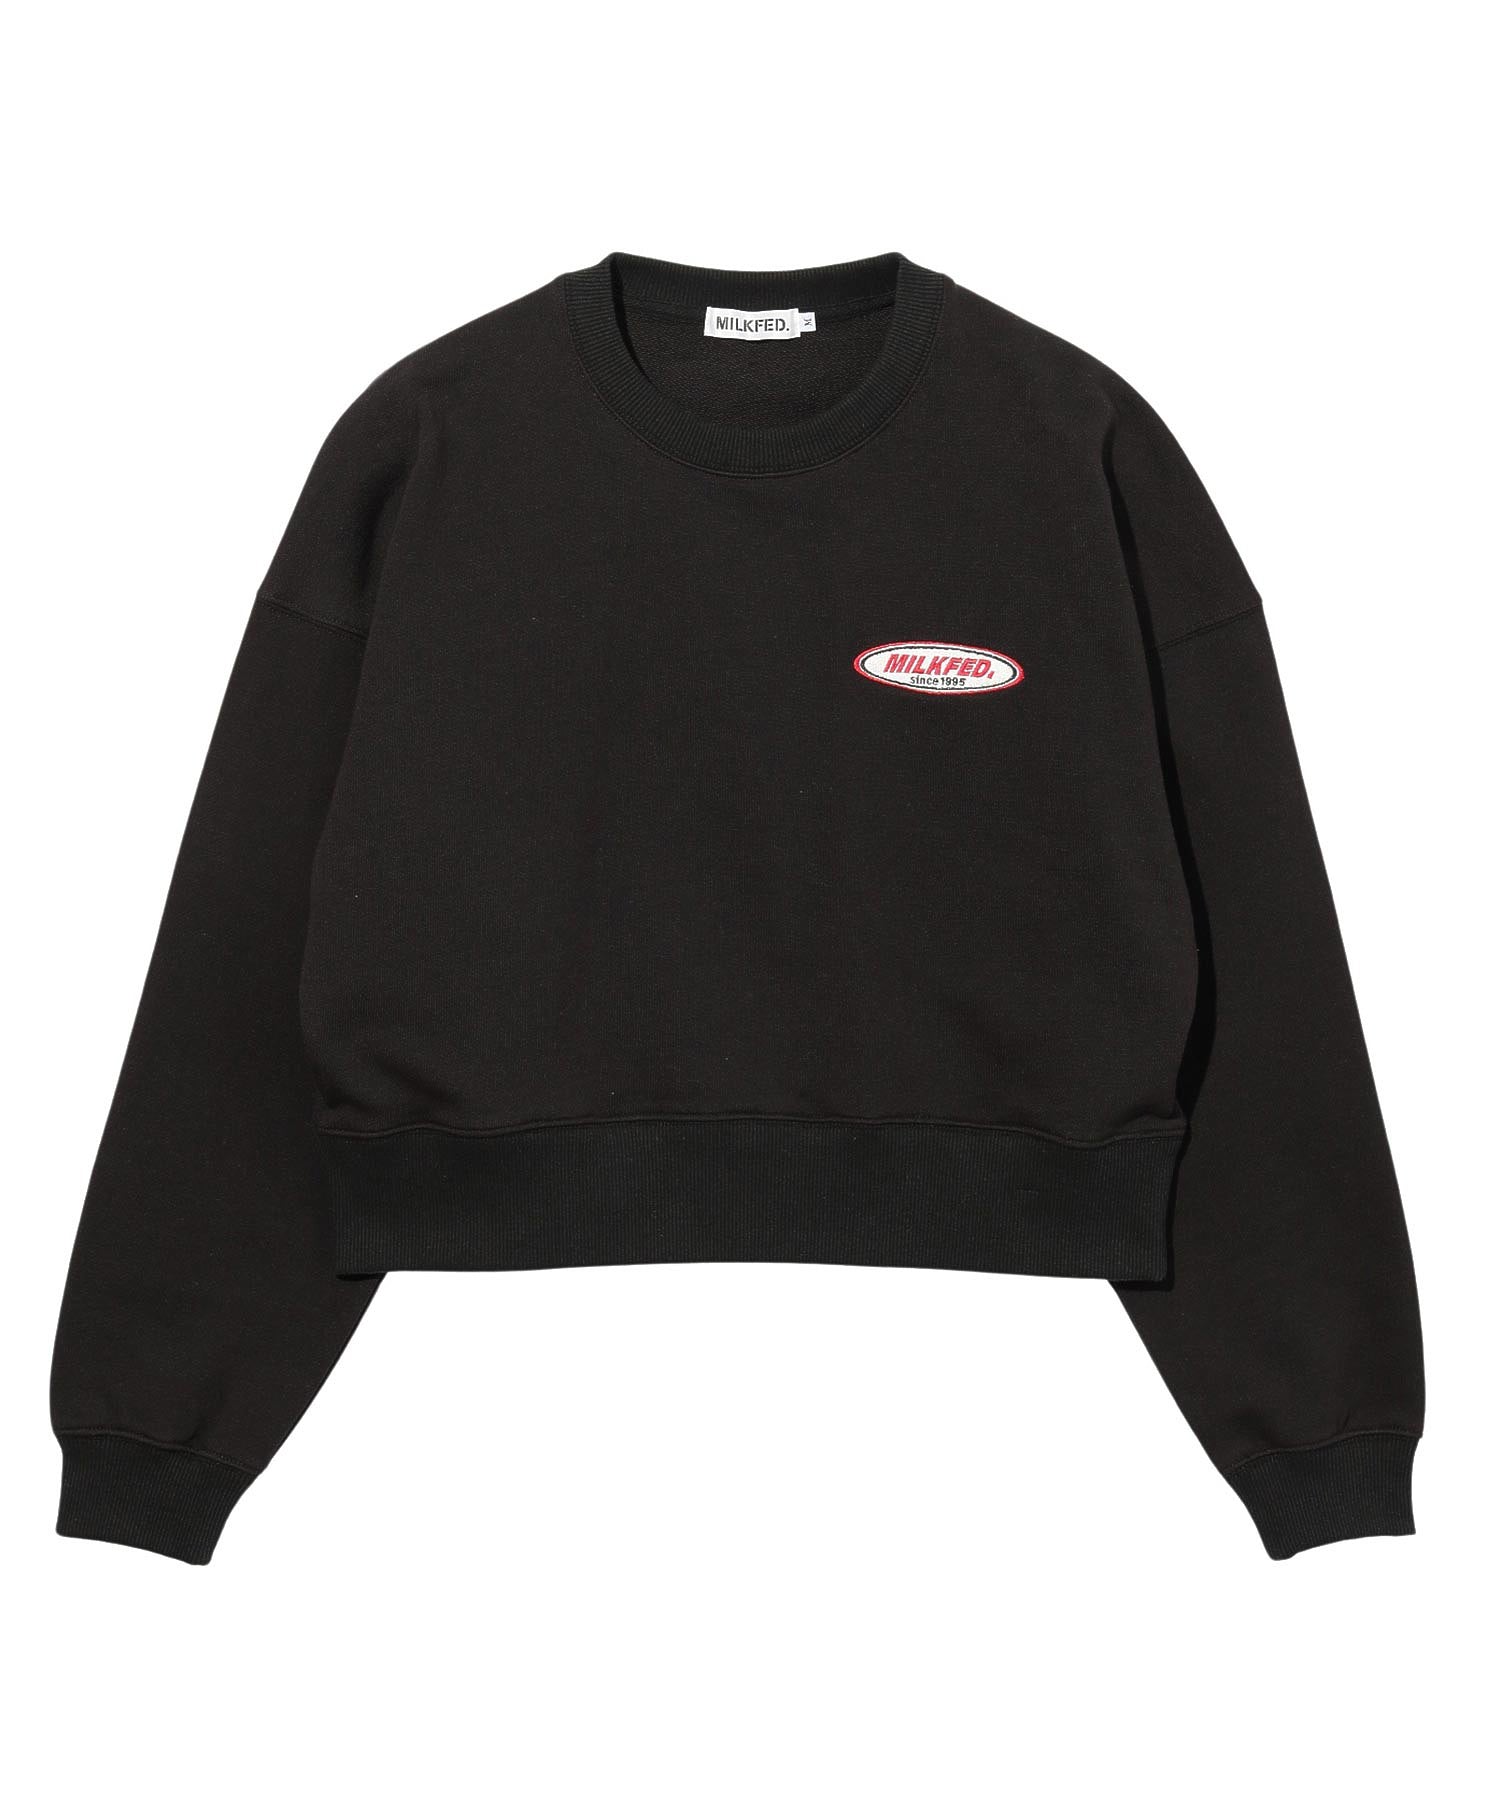 OVAL LOGO DAILY CREW NECK SWEAT TOP